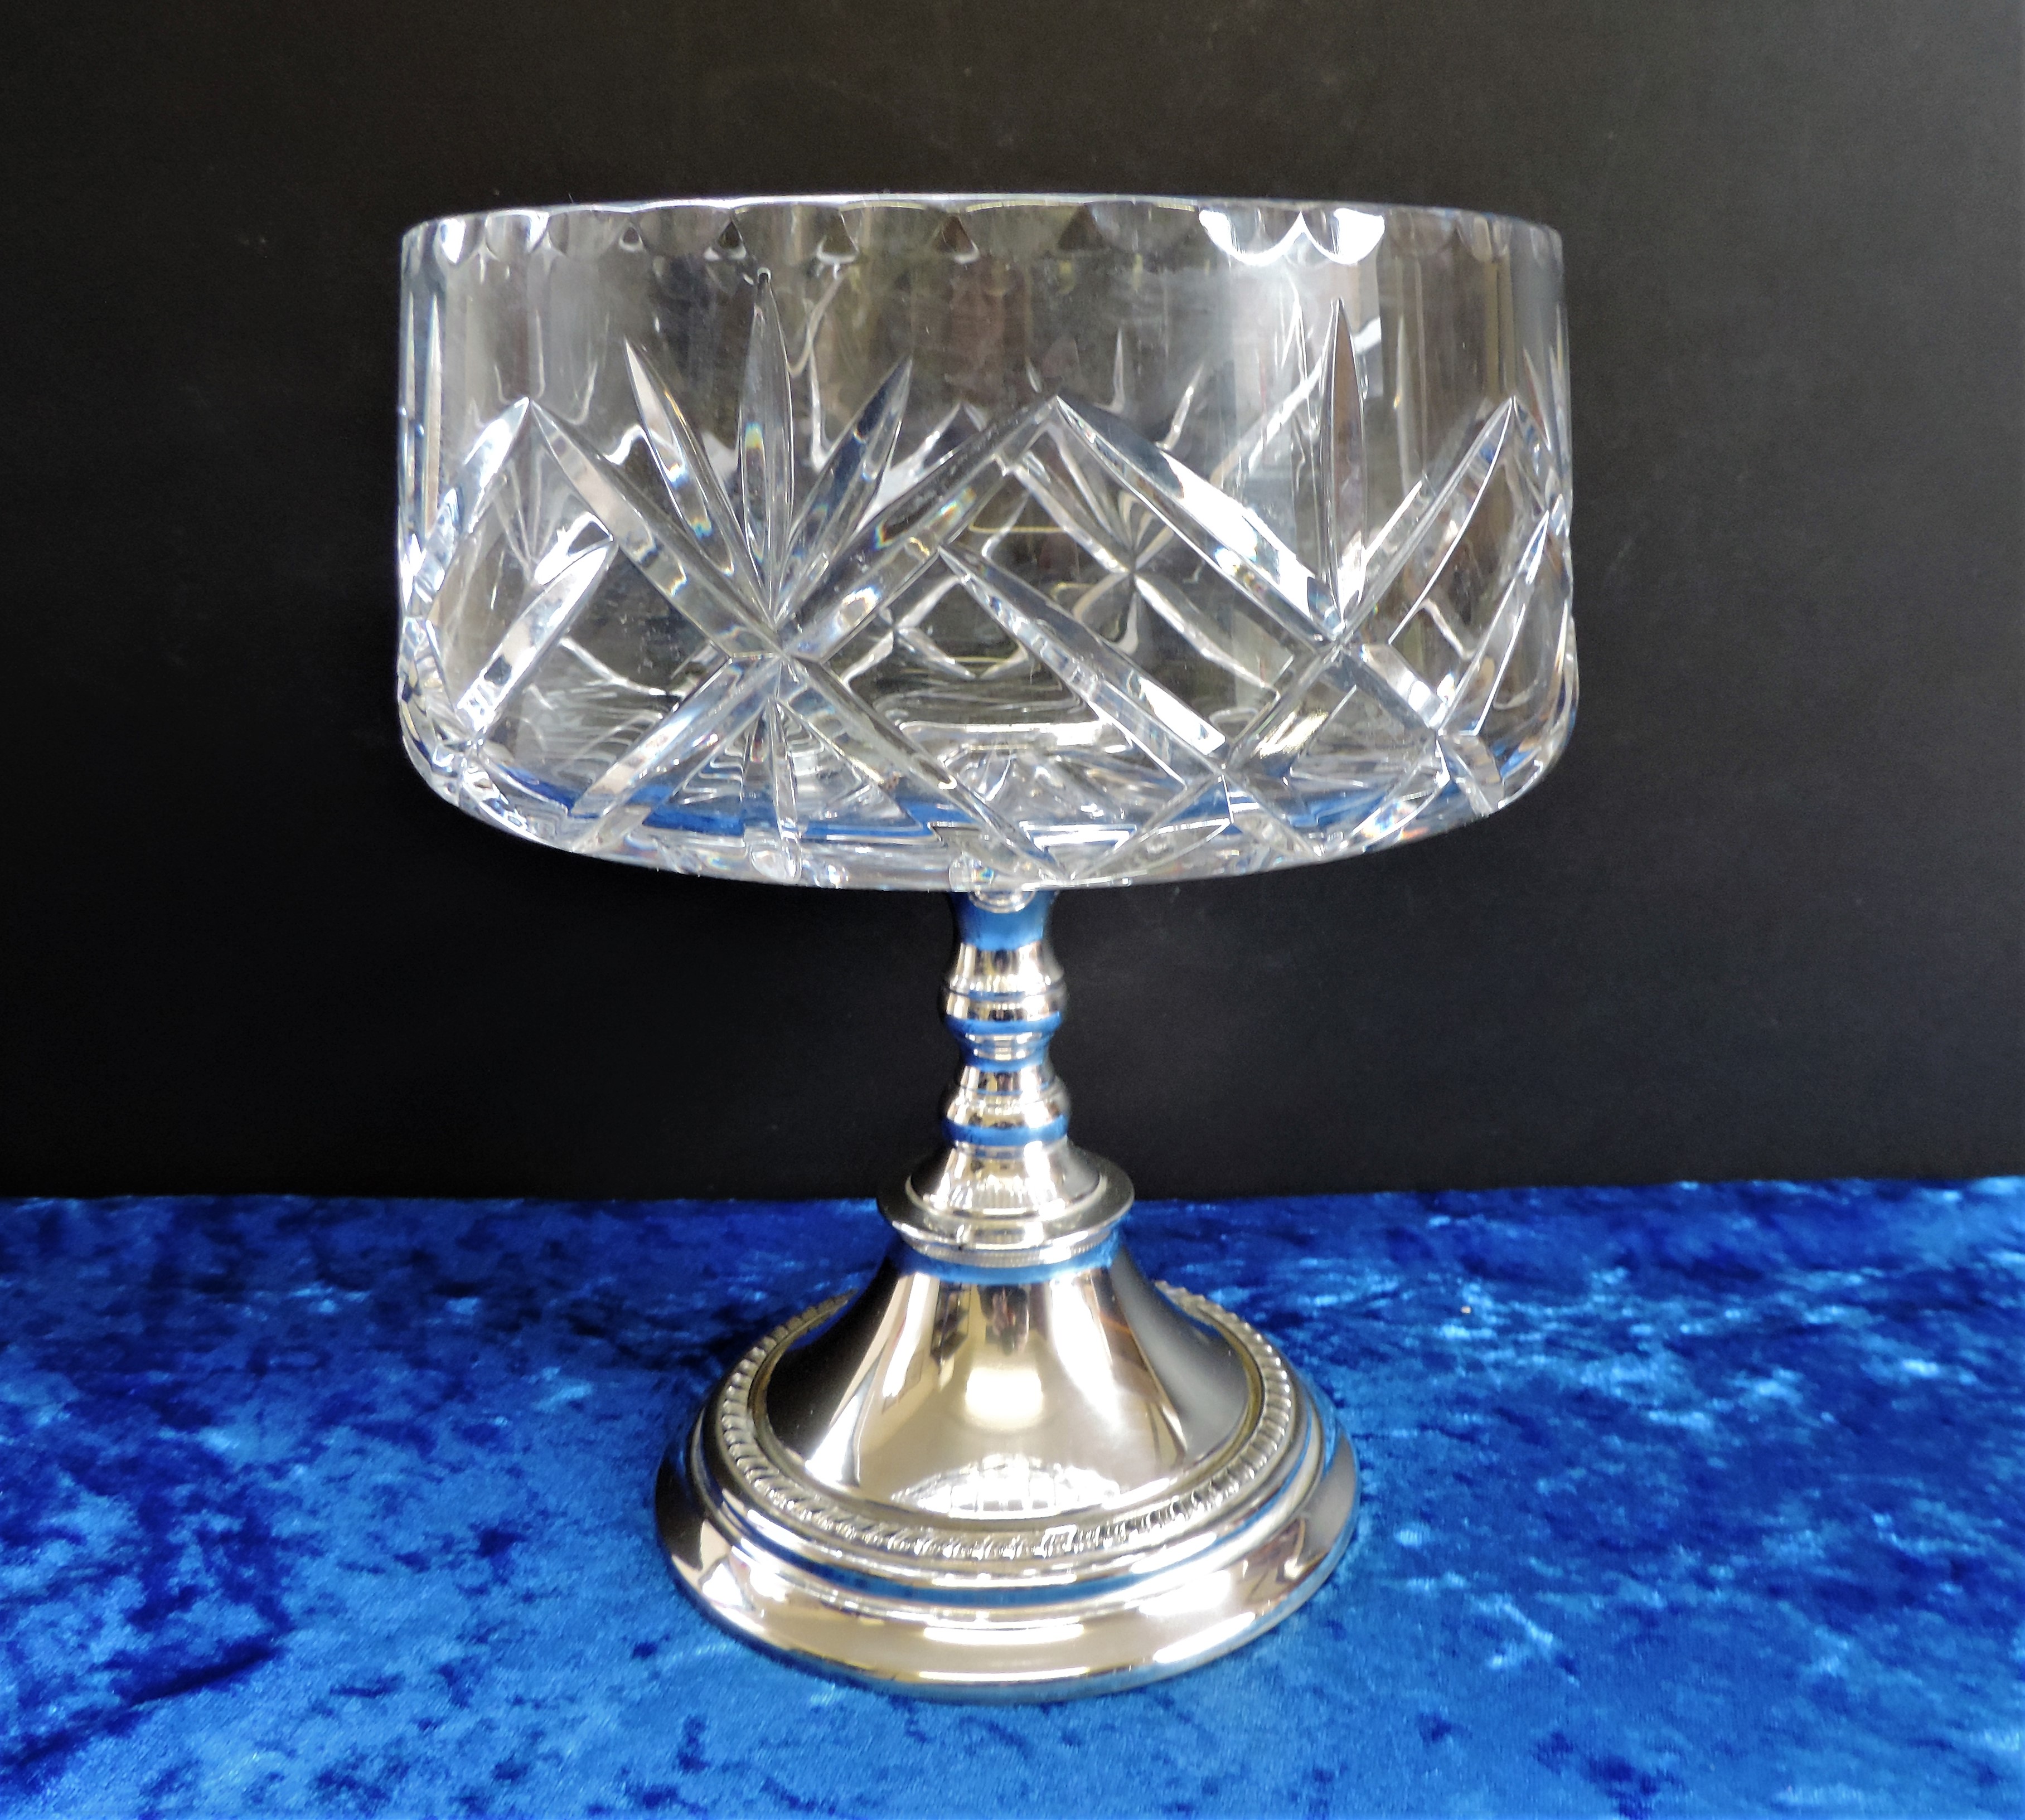 Vintage Elkington Silver Plate and Cut Crystal Table Centrepiece